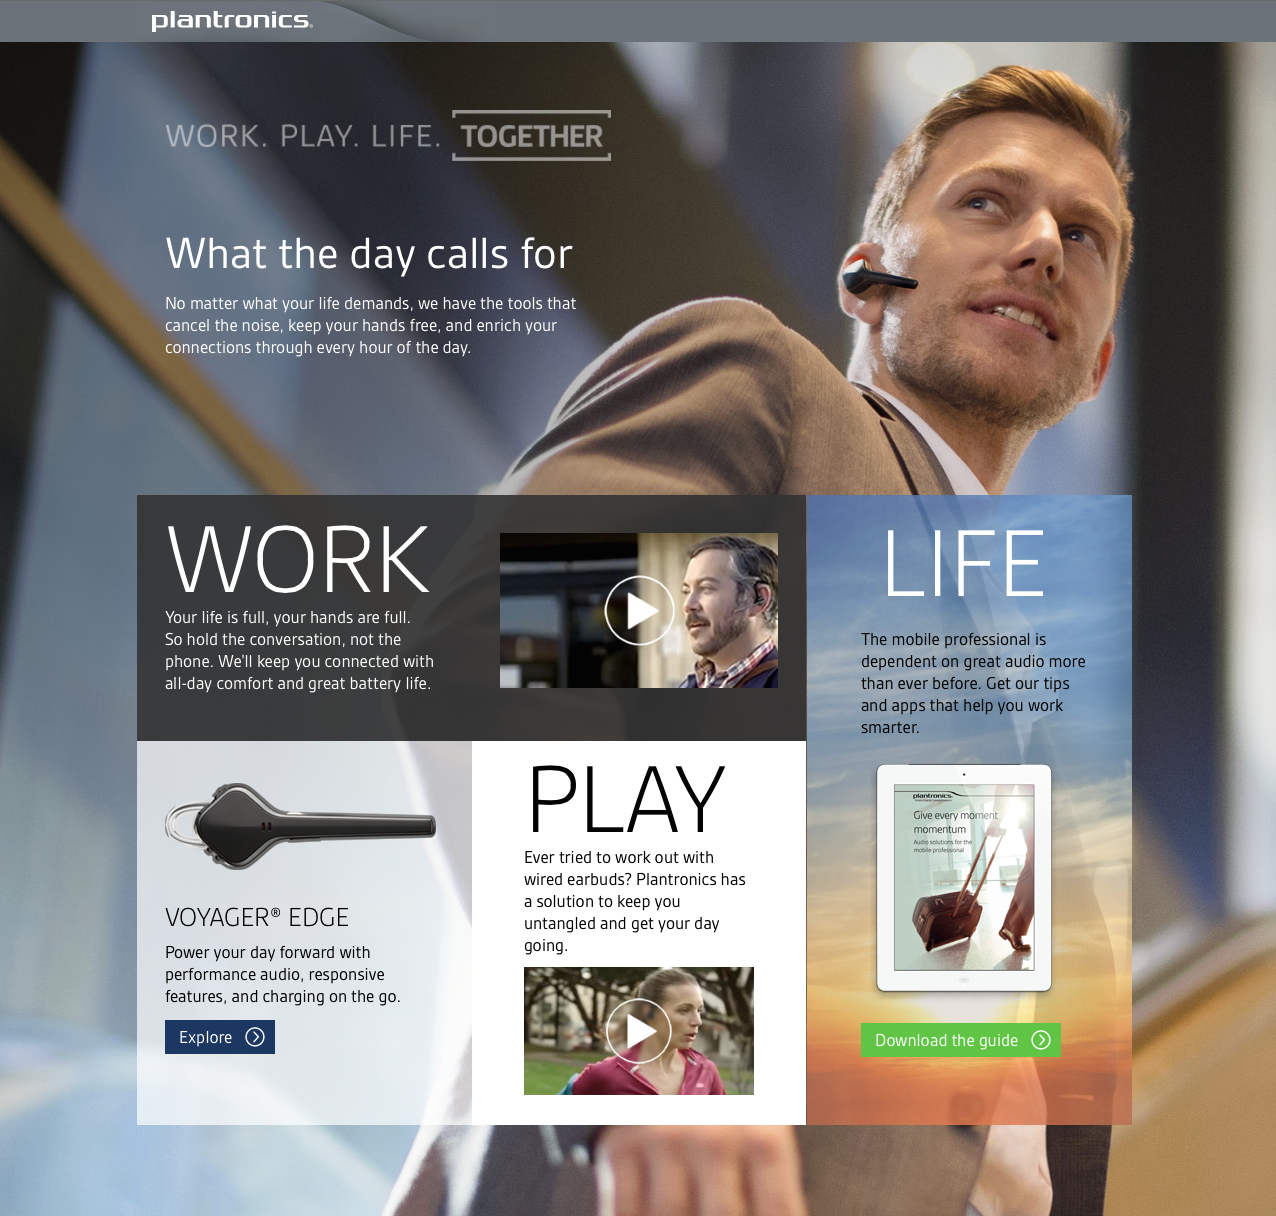 Landing Page - What the day calls for